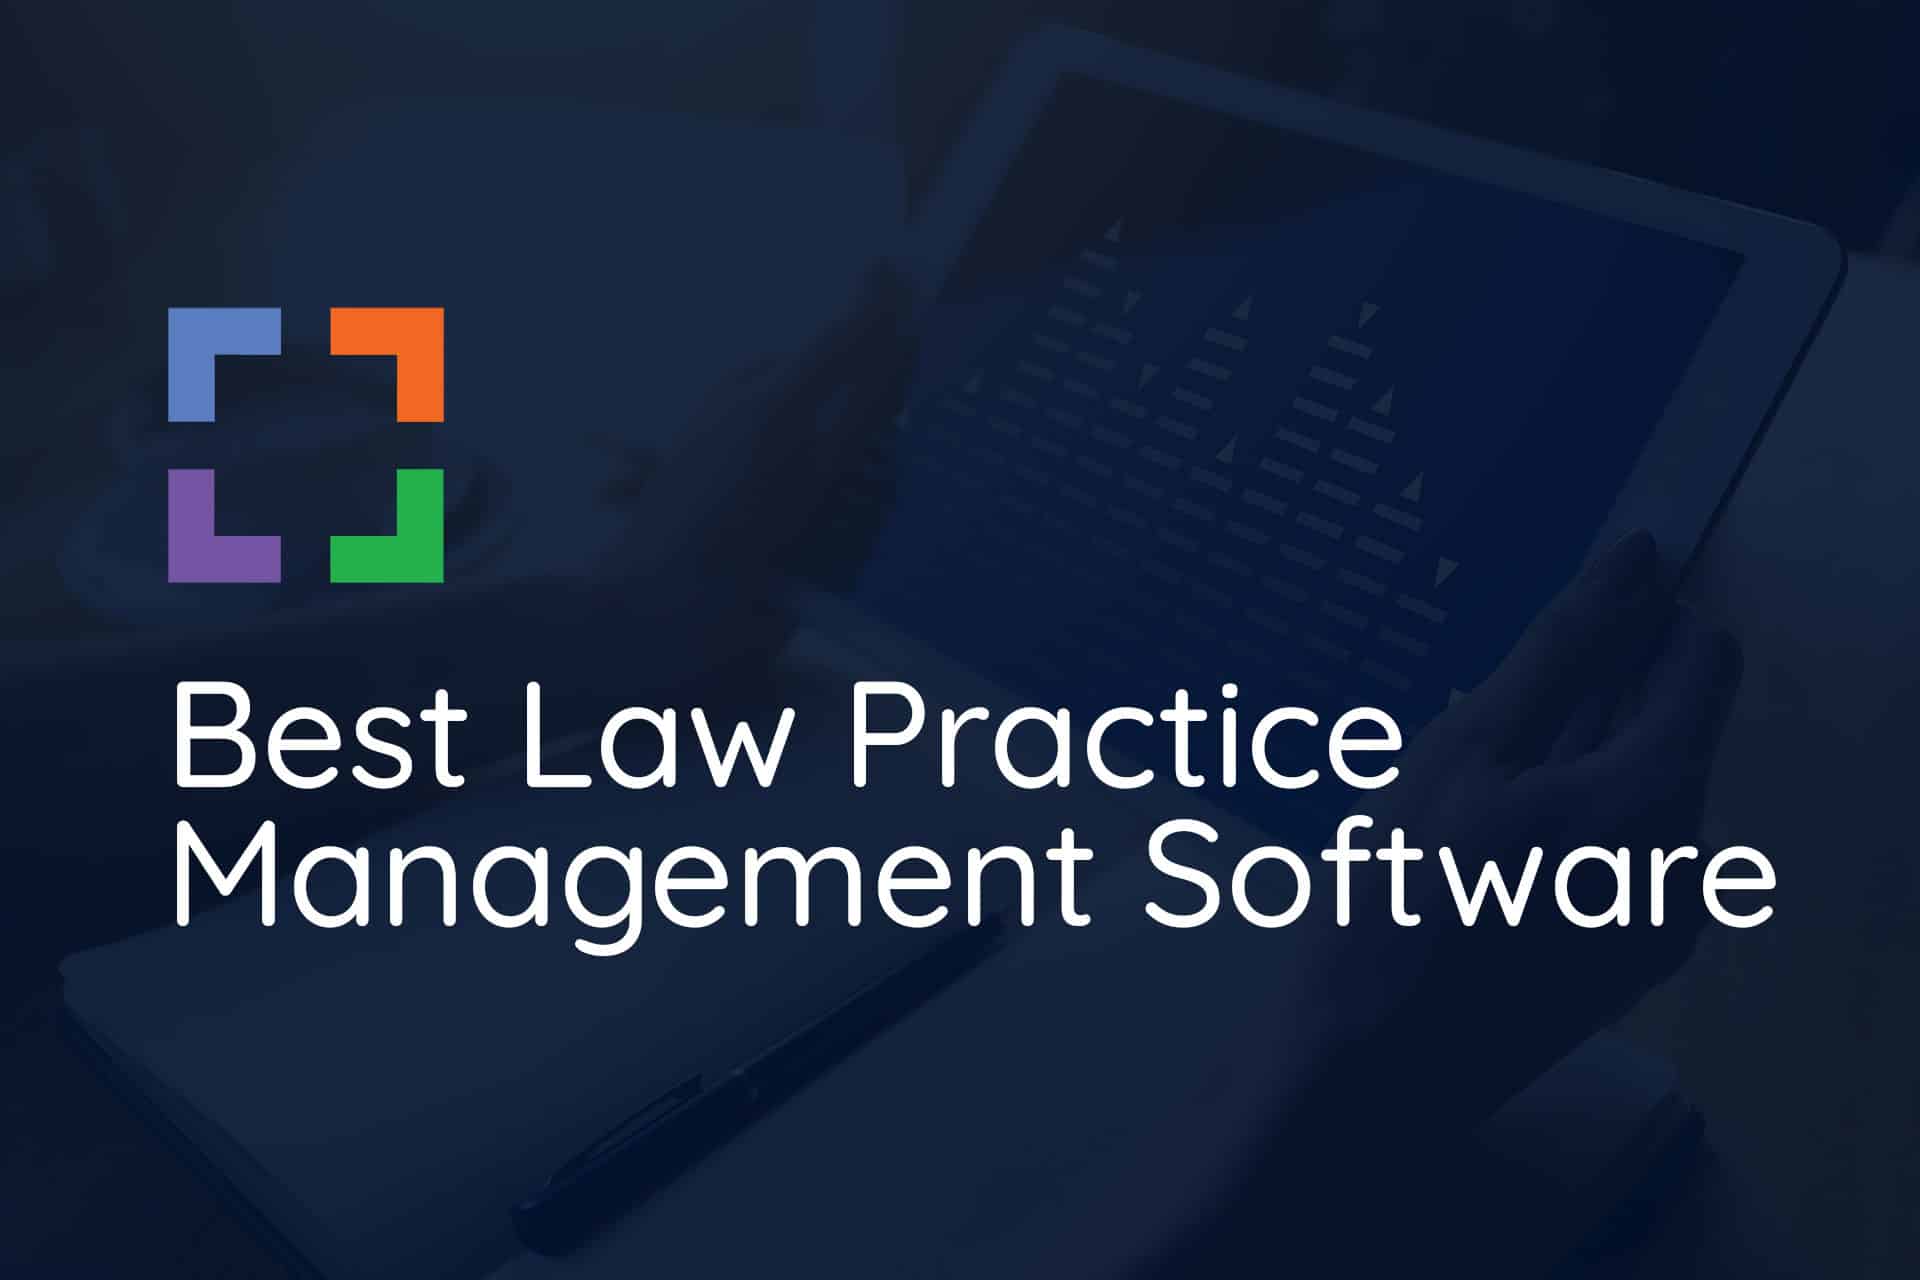 Best Law Practice Management Software for 2022